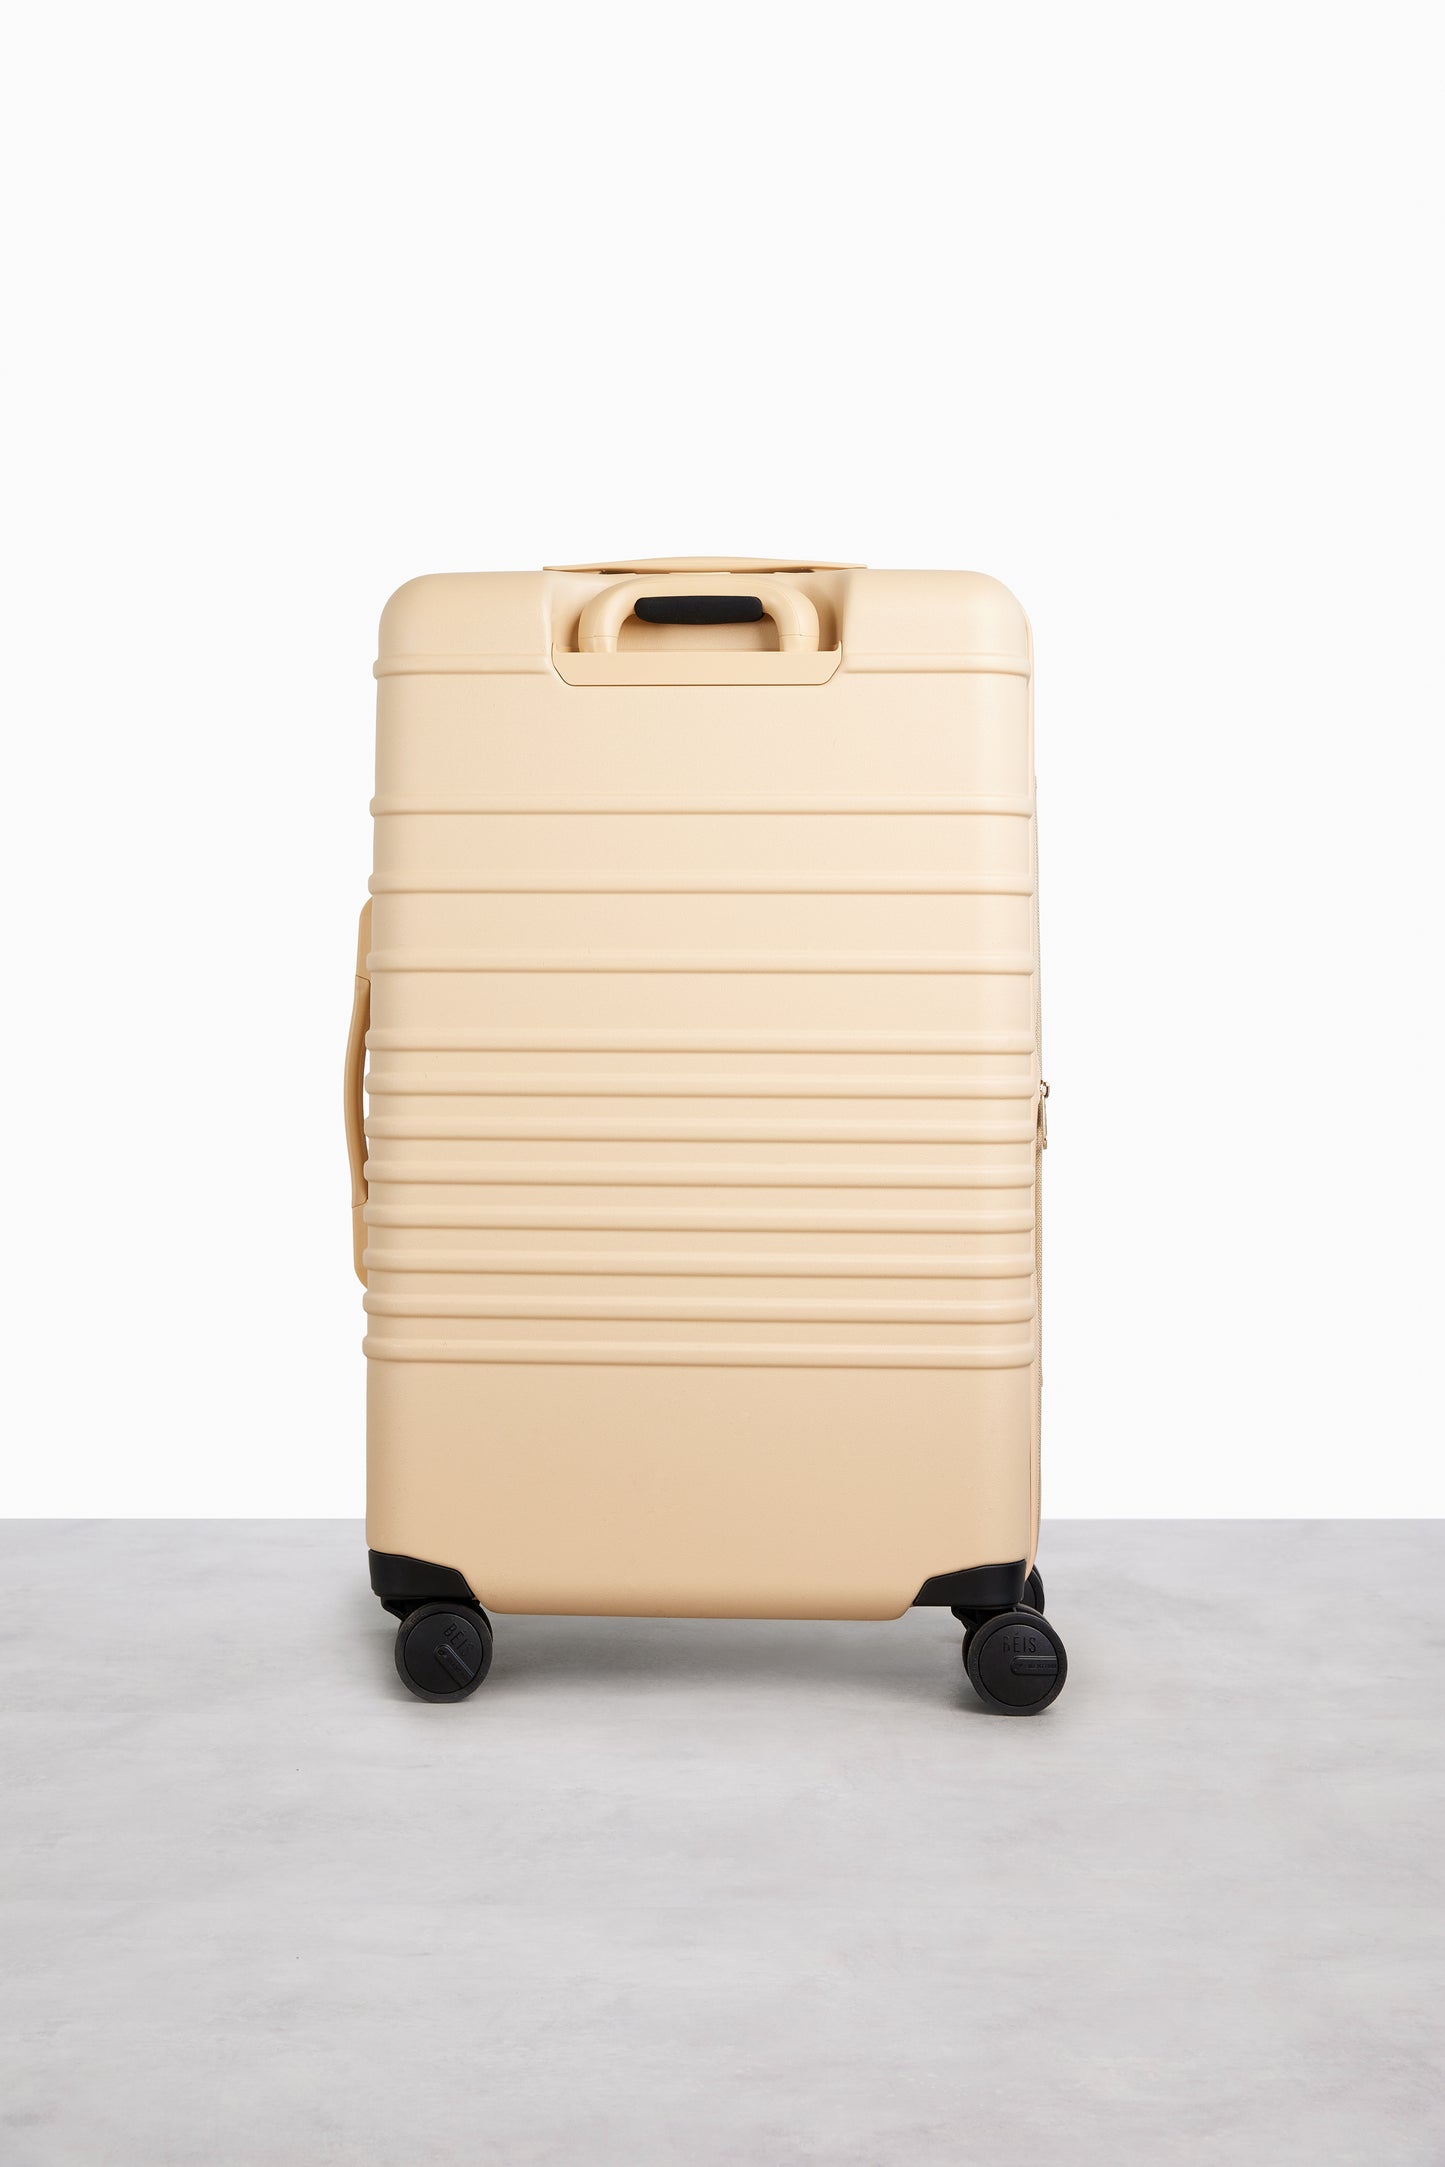 The 26" Check-In Roller in Beige